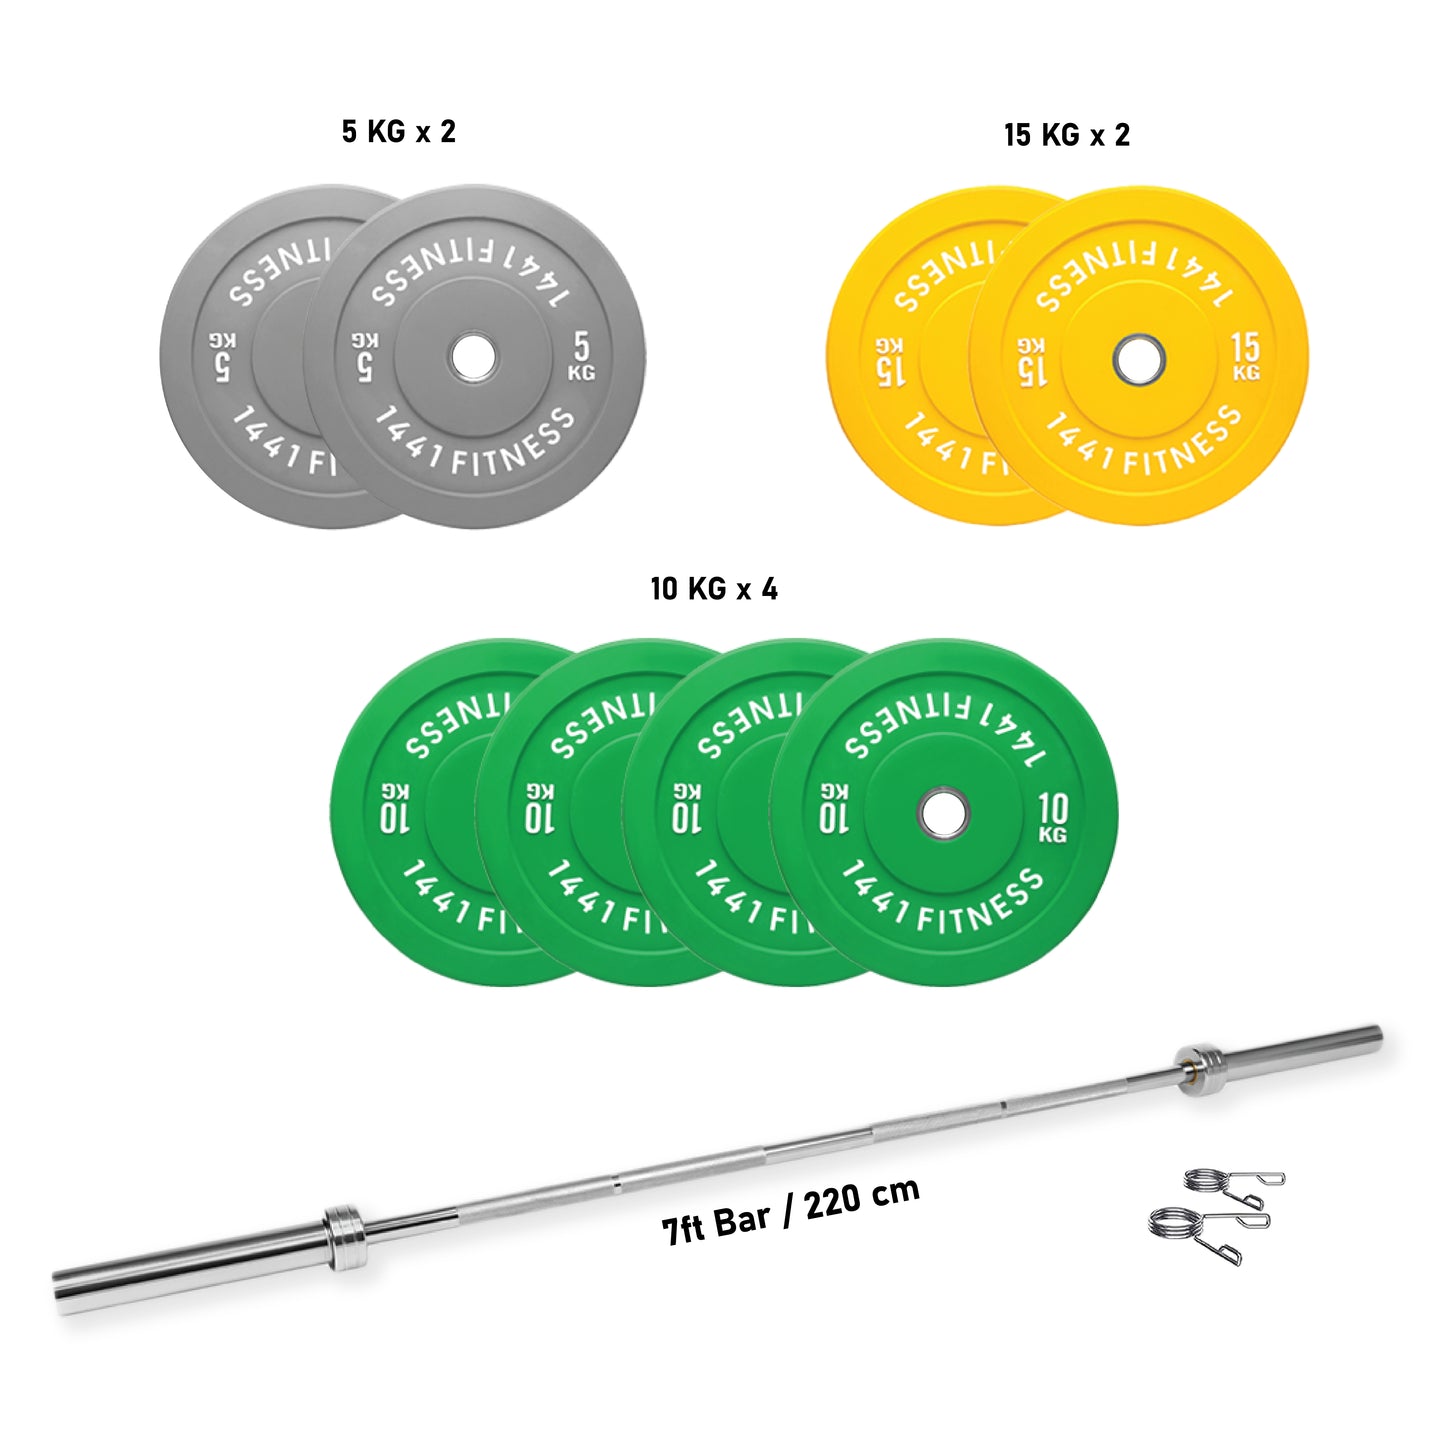 7 Ft Olympic Barbell and Color Bumper Plate Set - 100 KG | 1441 Fitness